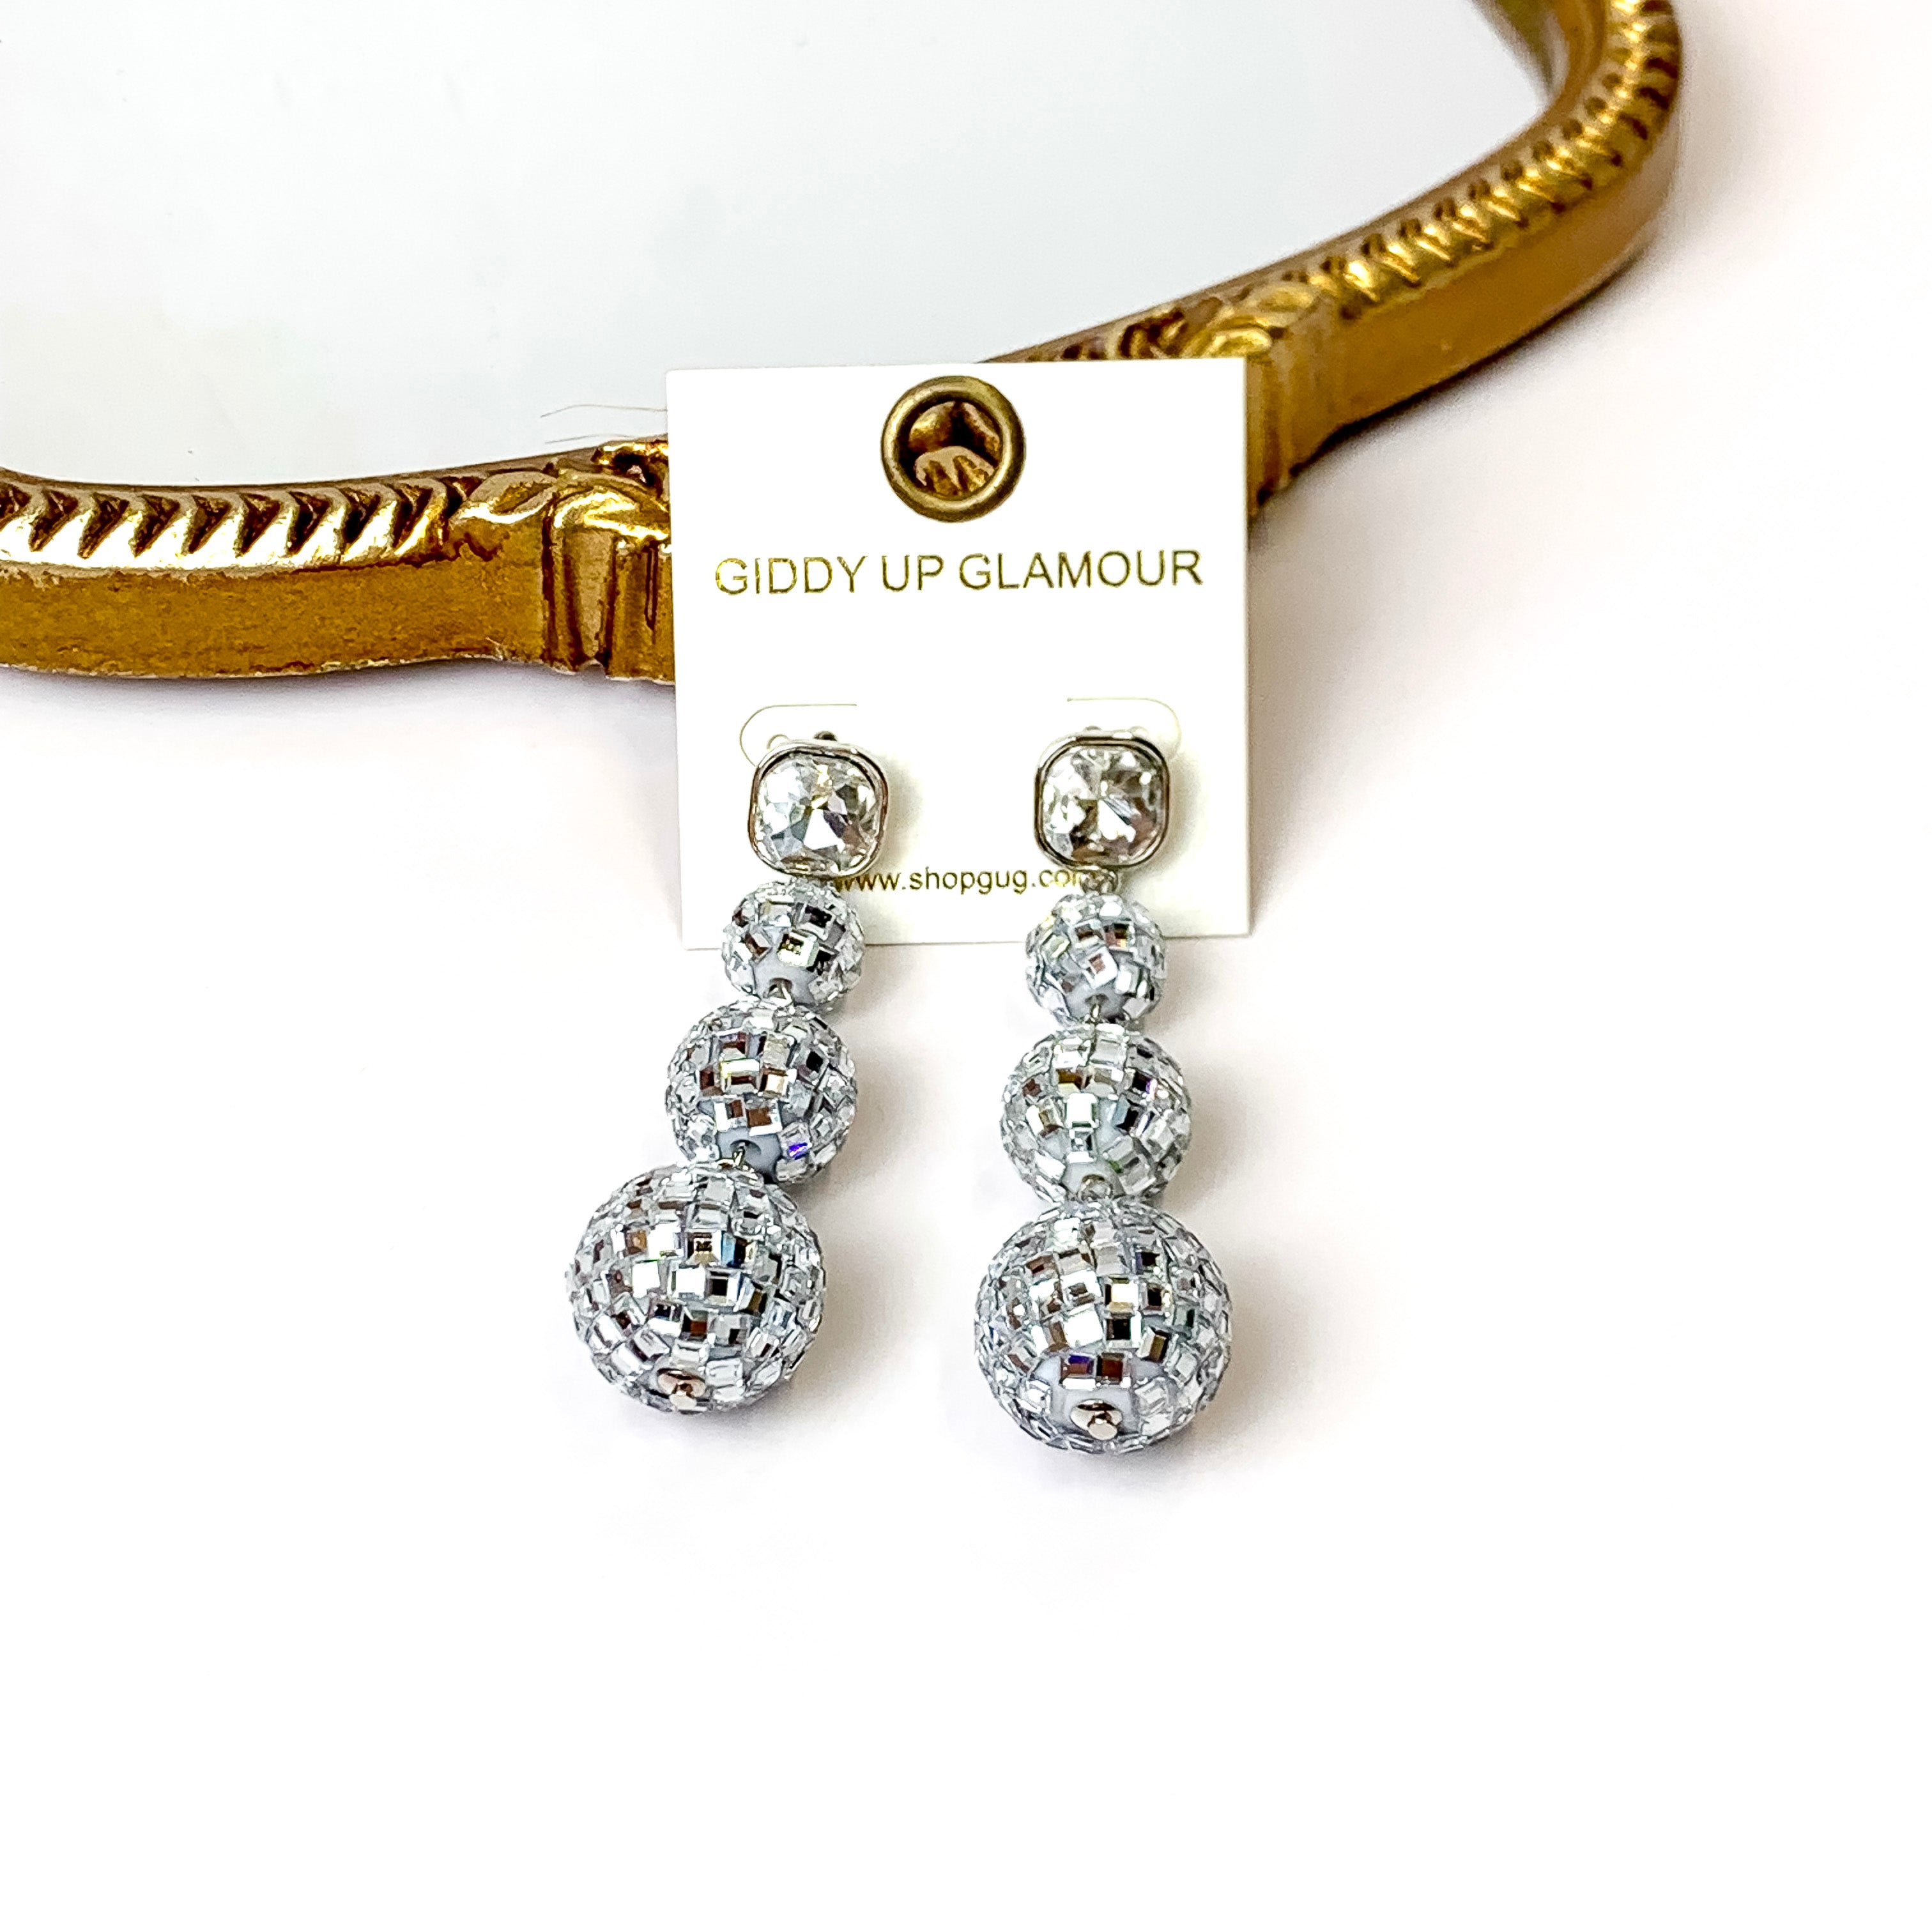 Cushion Crystal Post Disco Ball Dangle Earrings in Silver Tone - Giddy Up Glamour Boutique